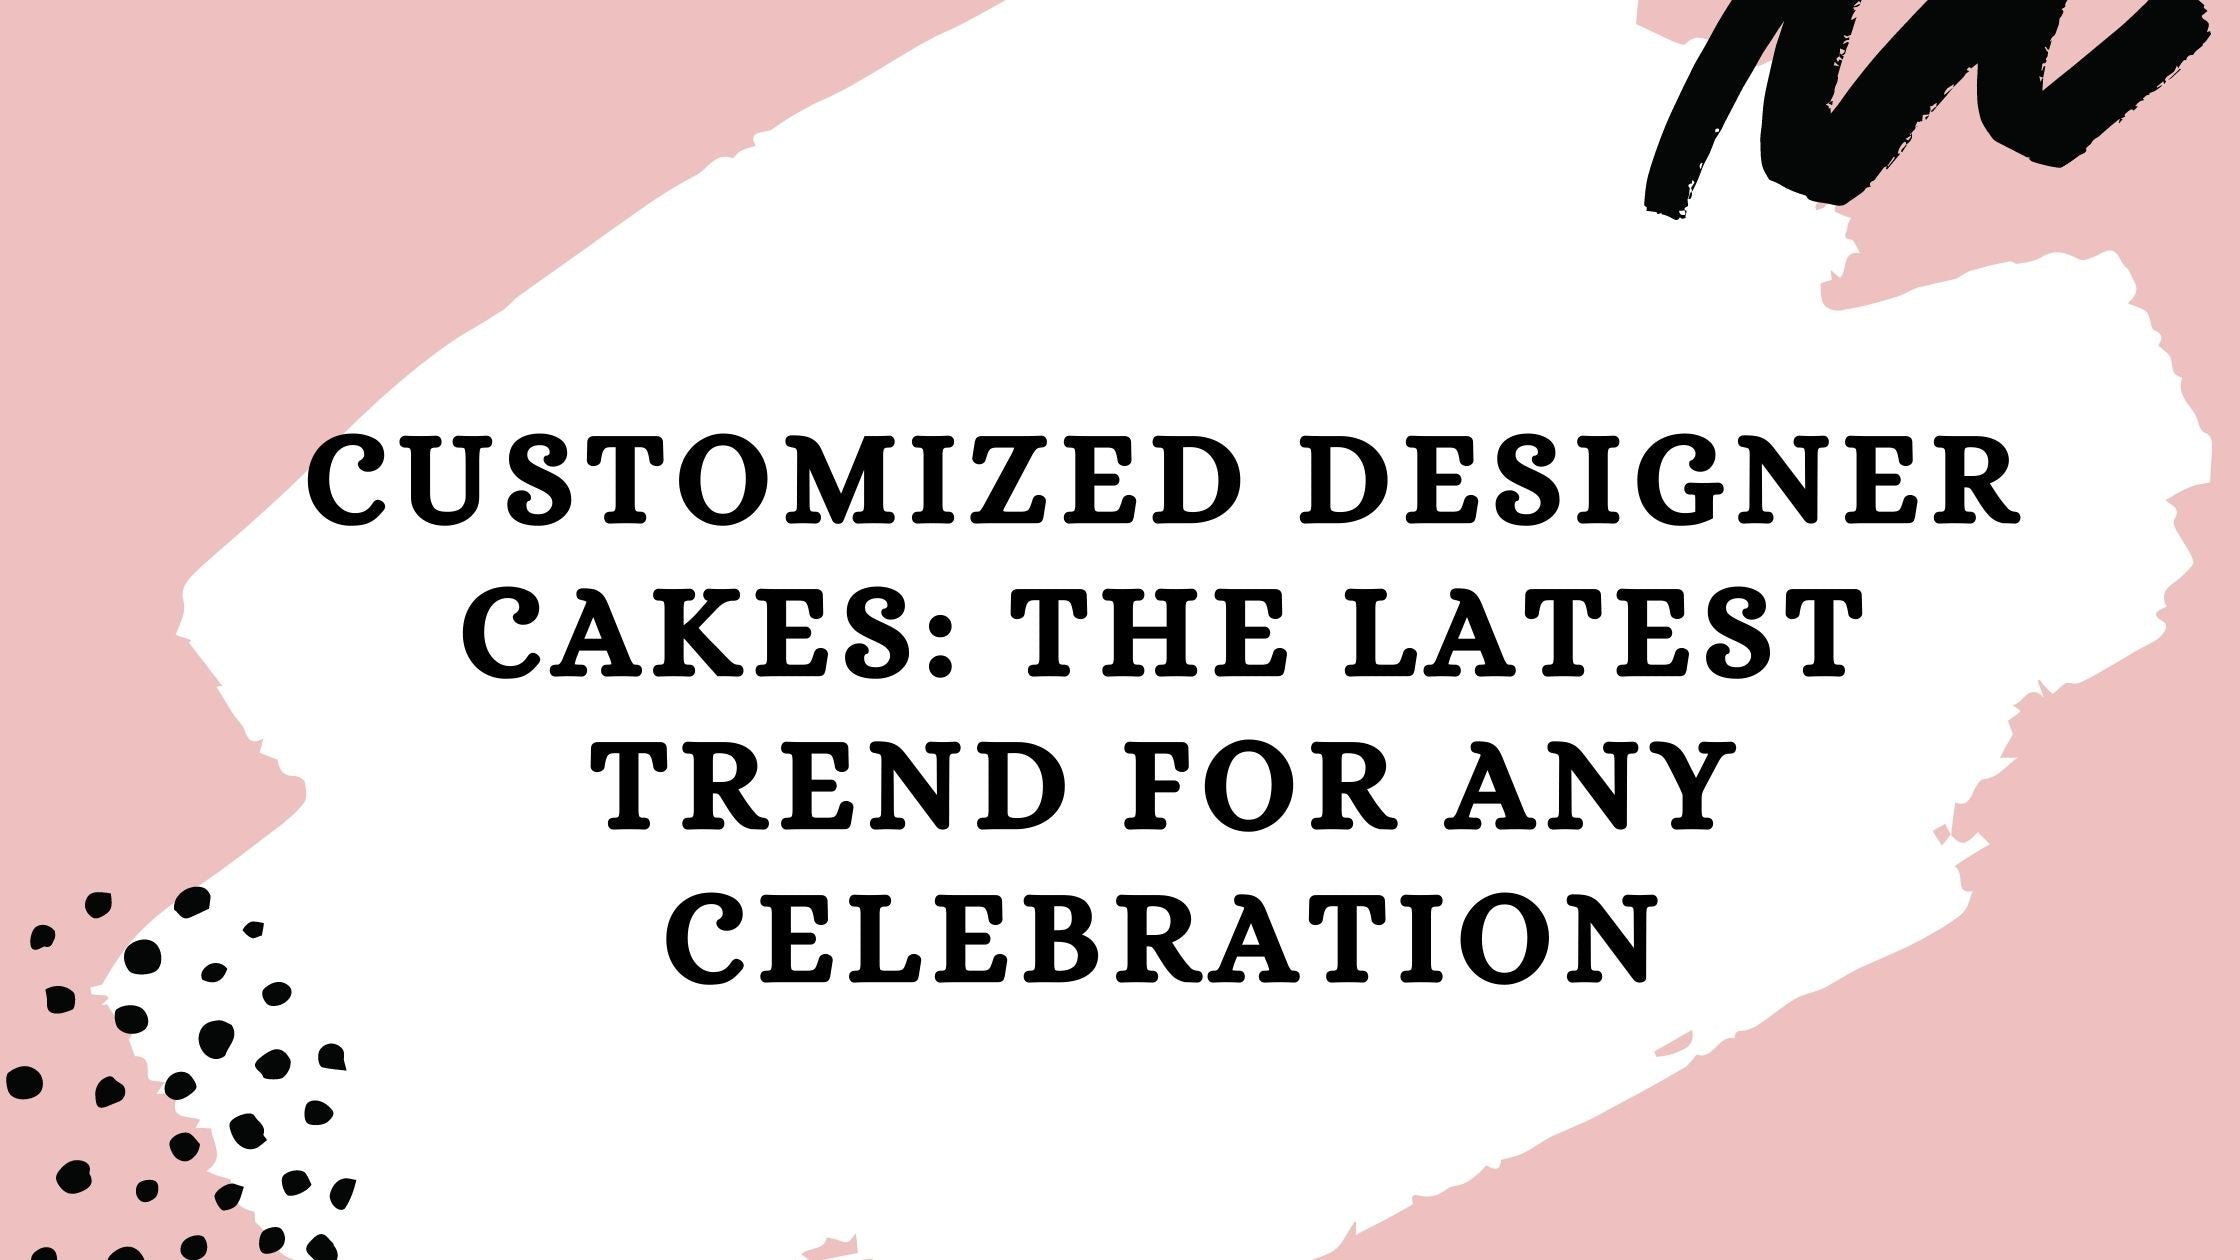 Customized Designer Cakes: The Latest Trend For Any Celebration